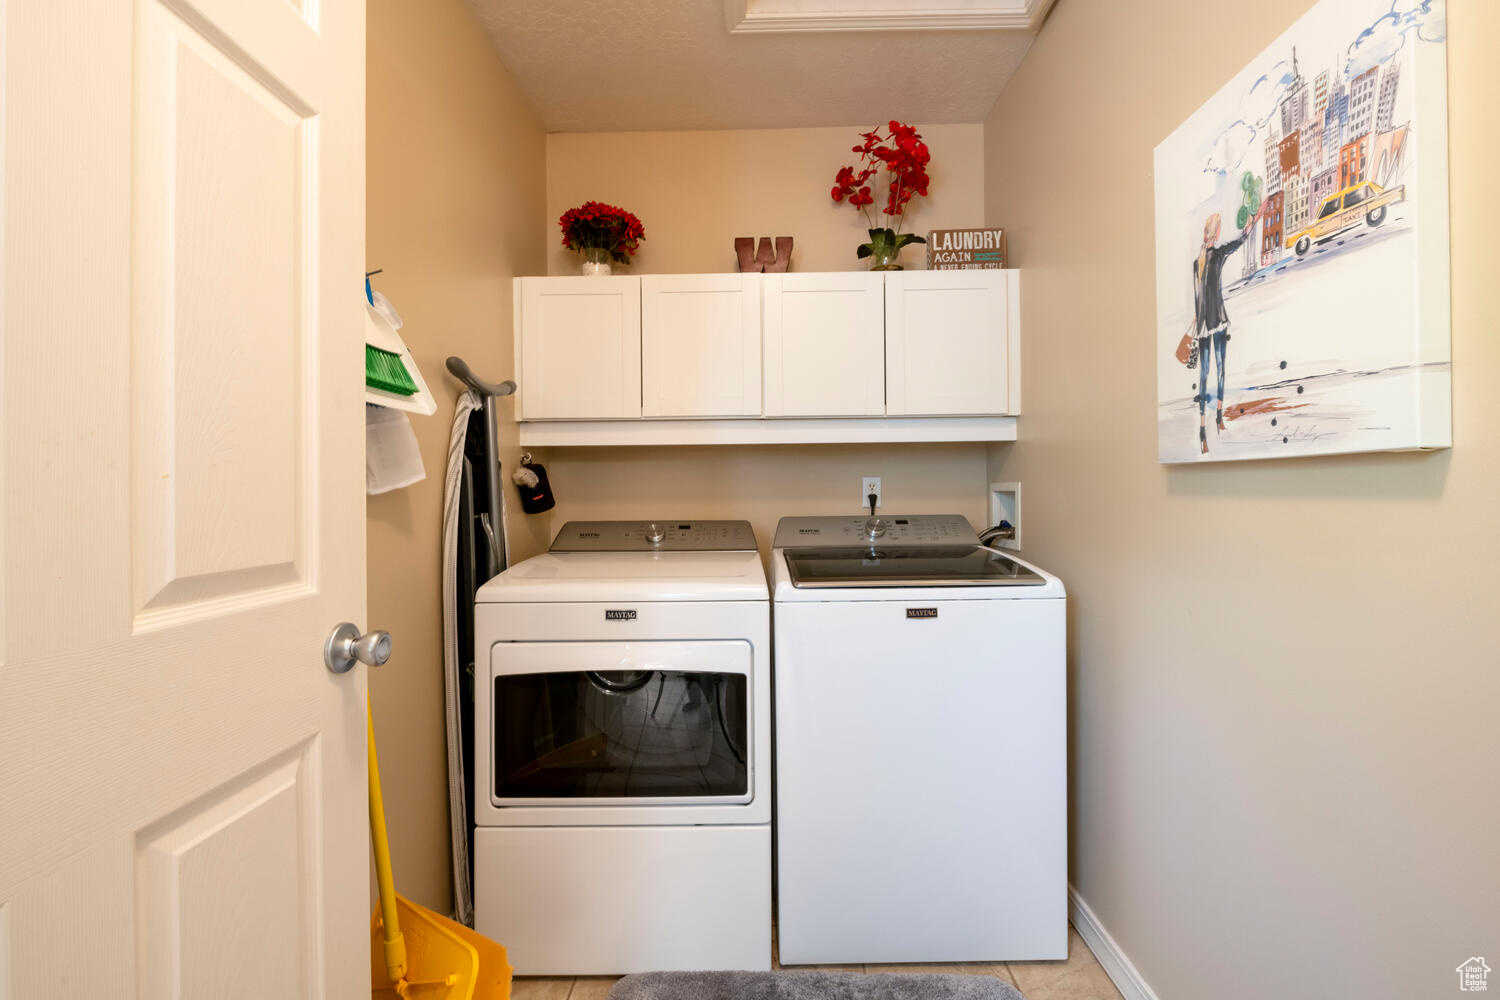 Laundry area featuring washer and dryer, cabinets, and light tile floors